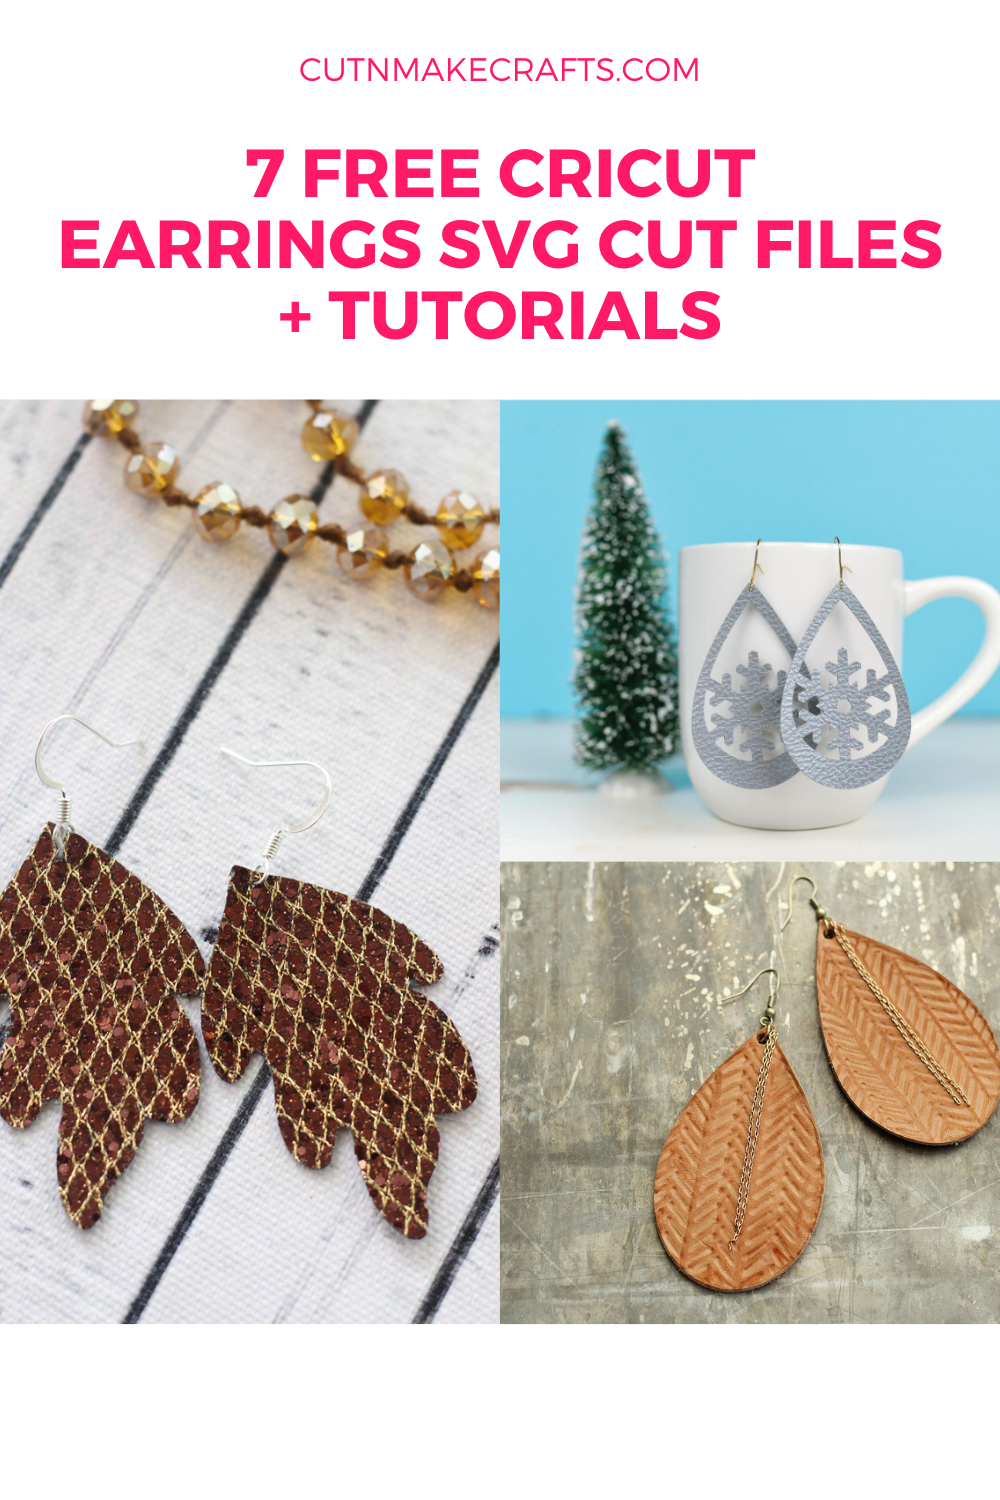 Download 7 Cricut Earring Tutorials With Free Earring Svg Cut Files SVG, PNG, EPS, DXF File